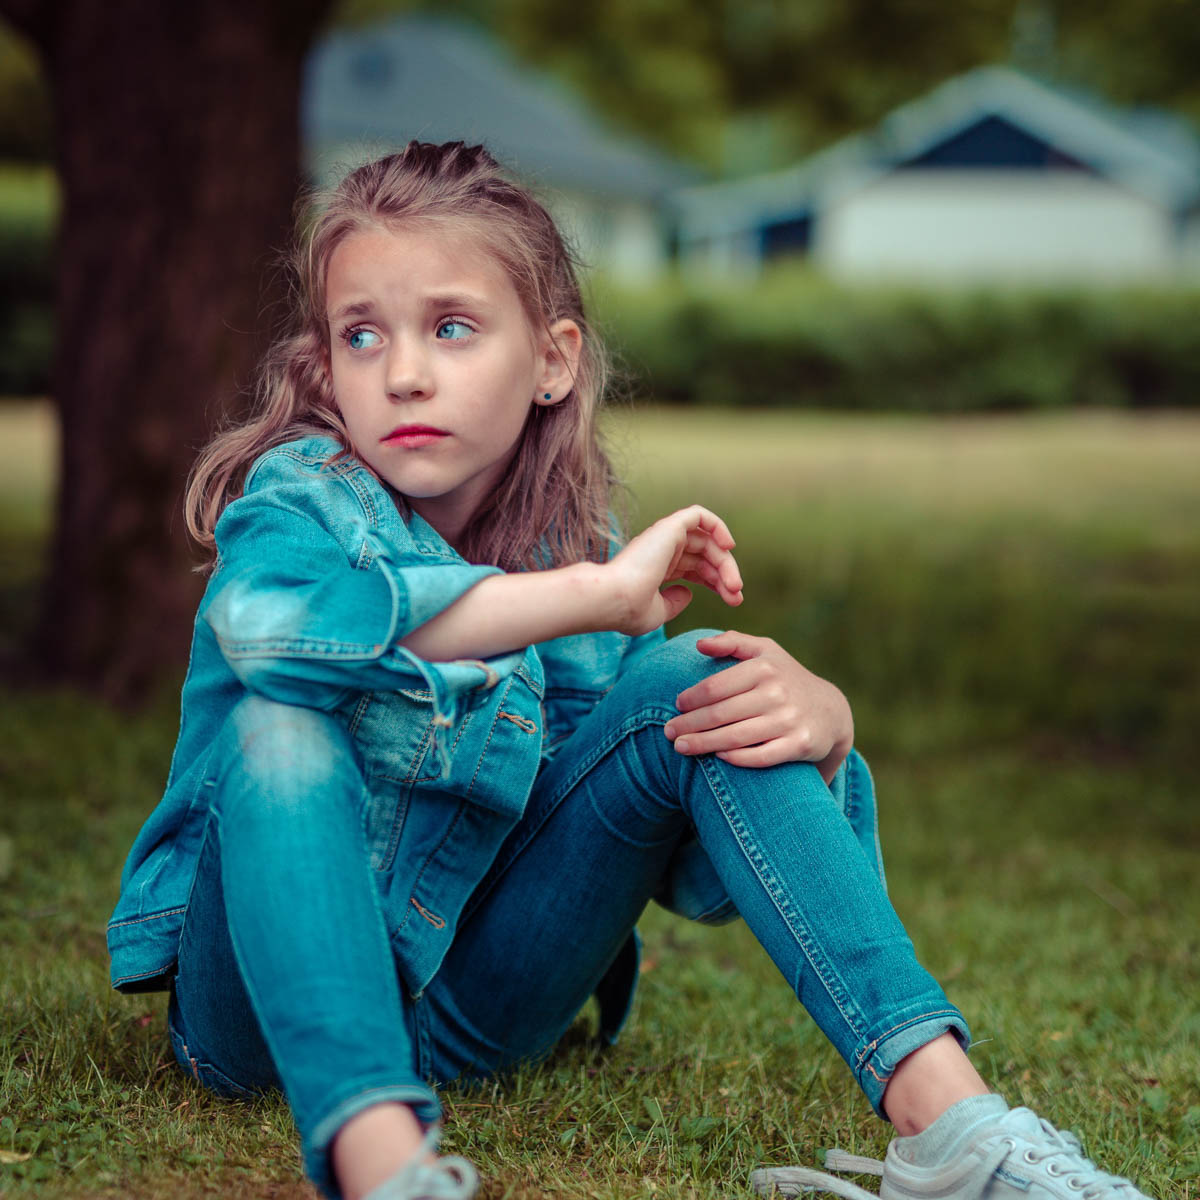 Suicide In Children: 3 Things You Definitely Need To Know